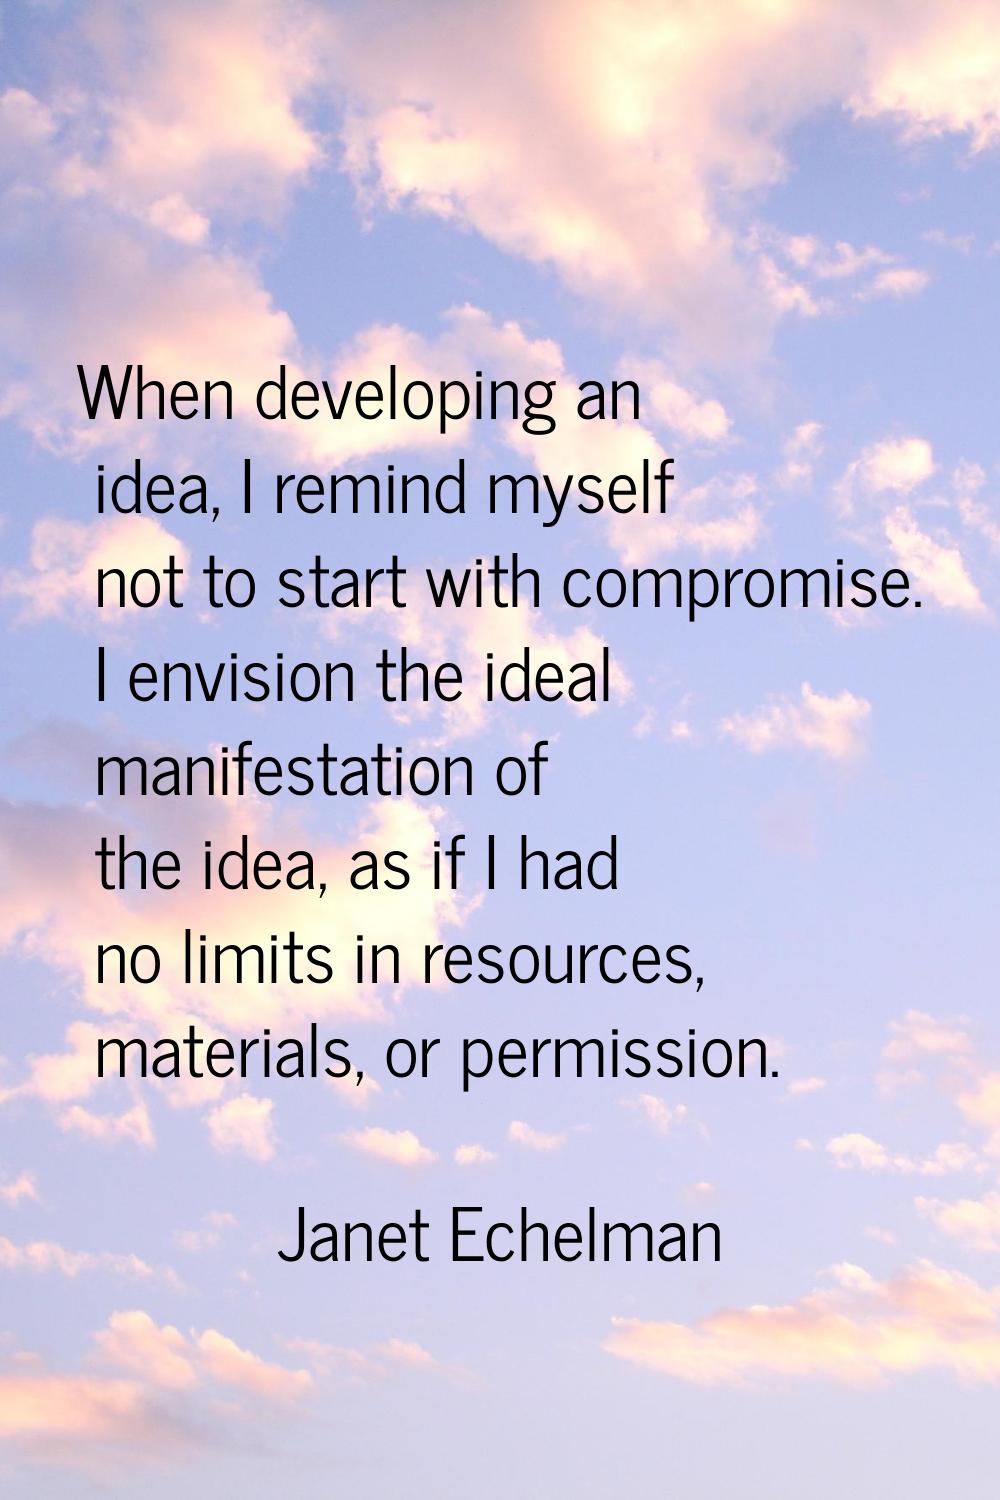 When developing an idea, I remind myself not to start with compromise. I envision the ideal manifes